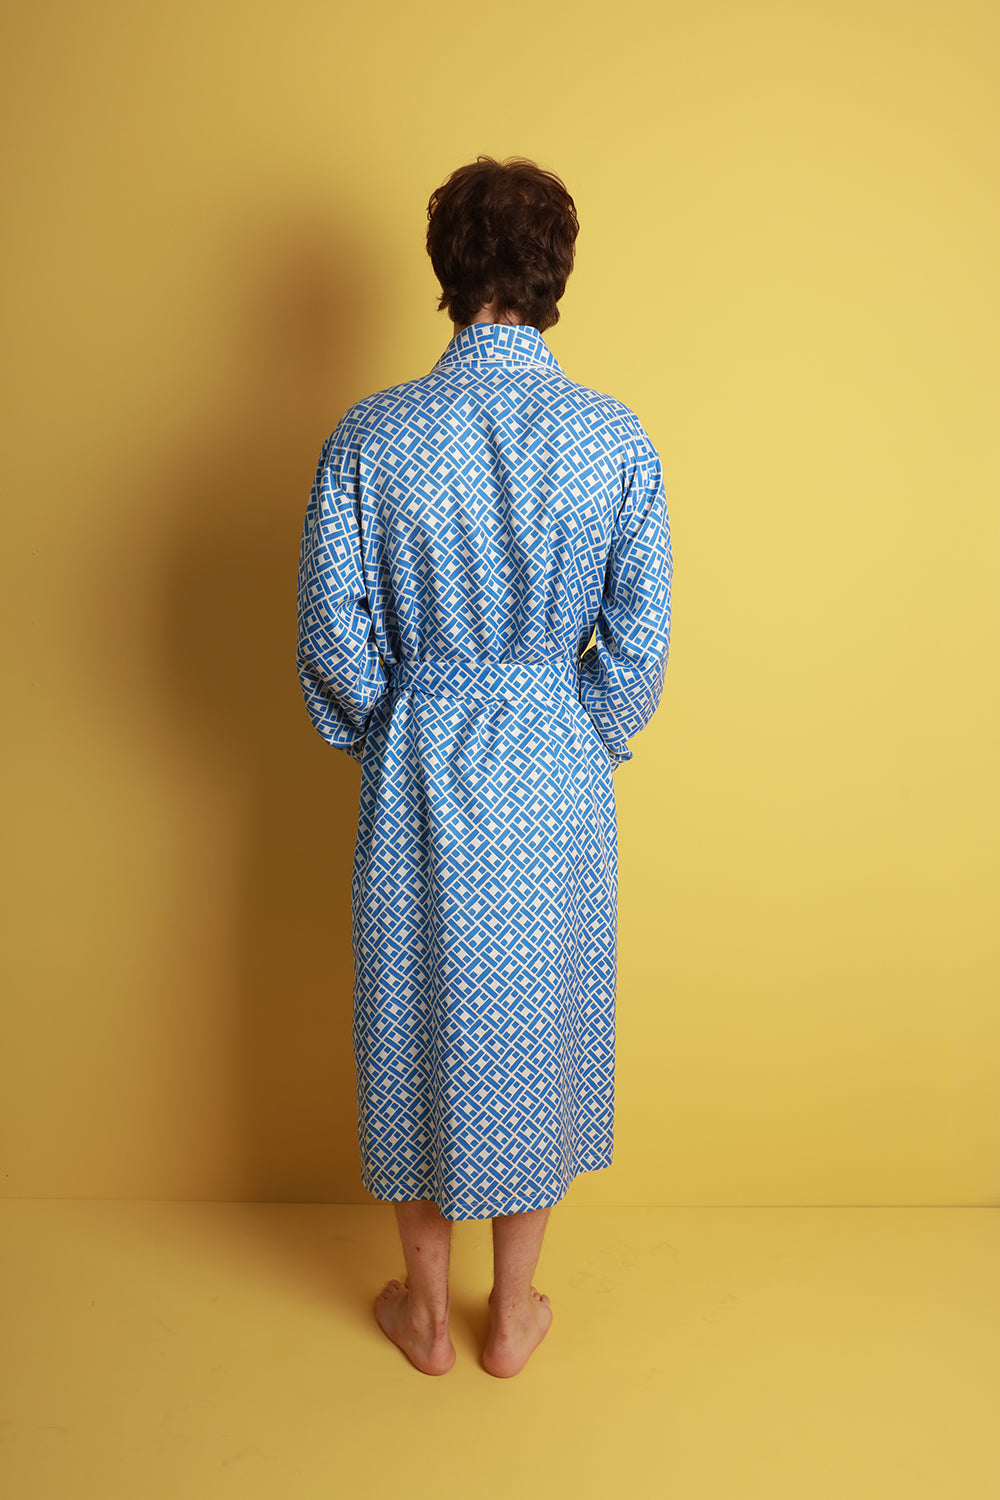 Men's Mulberry Silk Robe - Leh Sapphire. Please note that pieces purchased in our Archive Sale can't be refunded. We are happy to offer an exchange, if we have the stock available or a credit note.